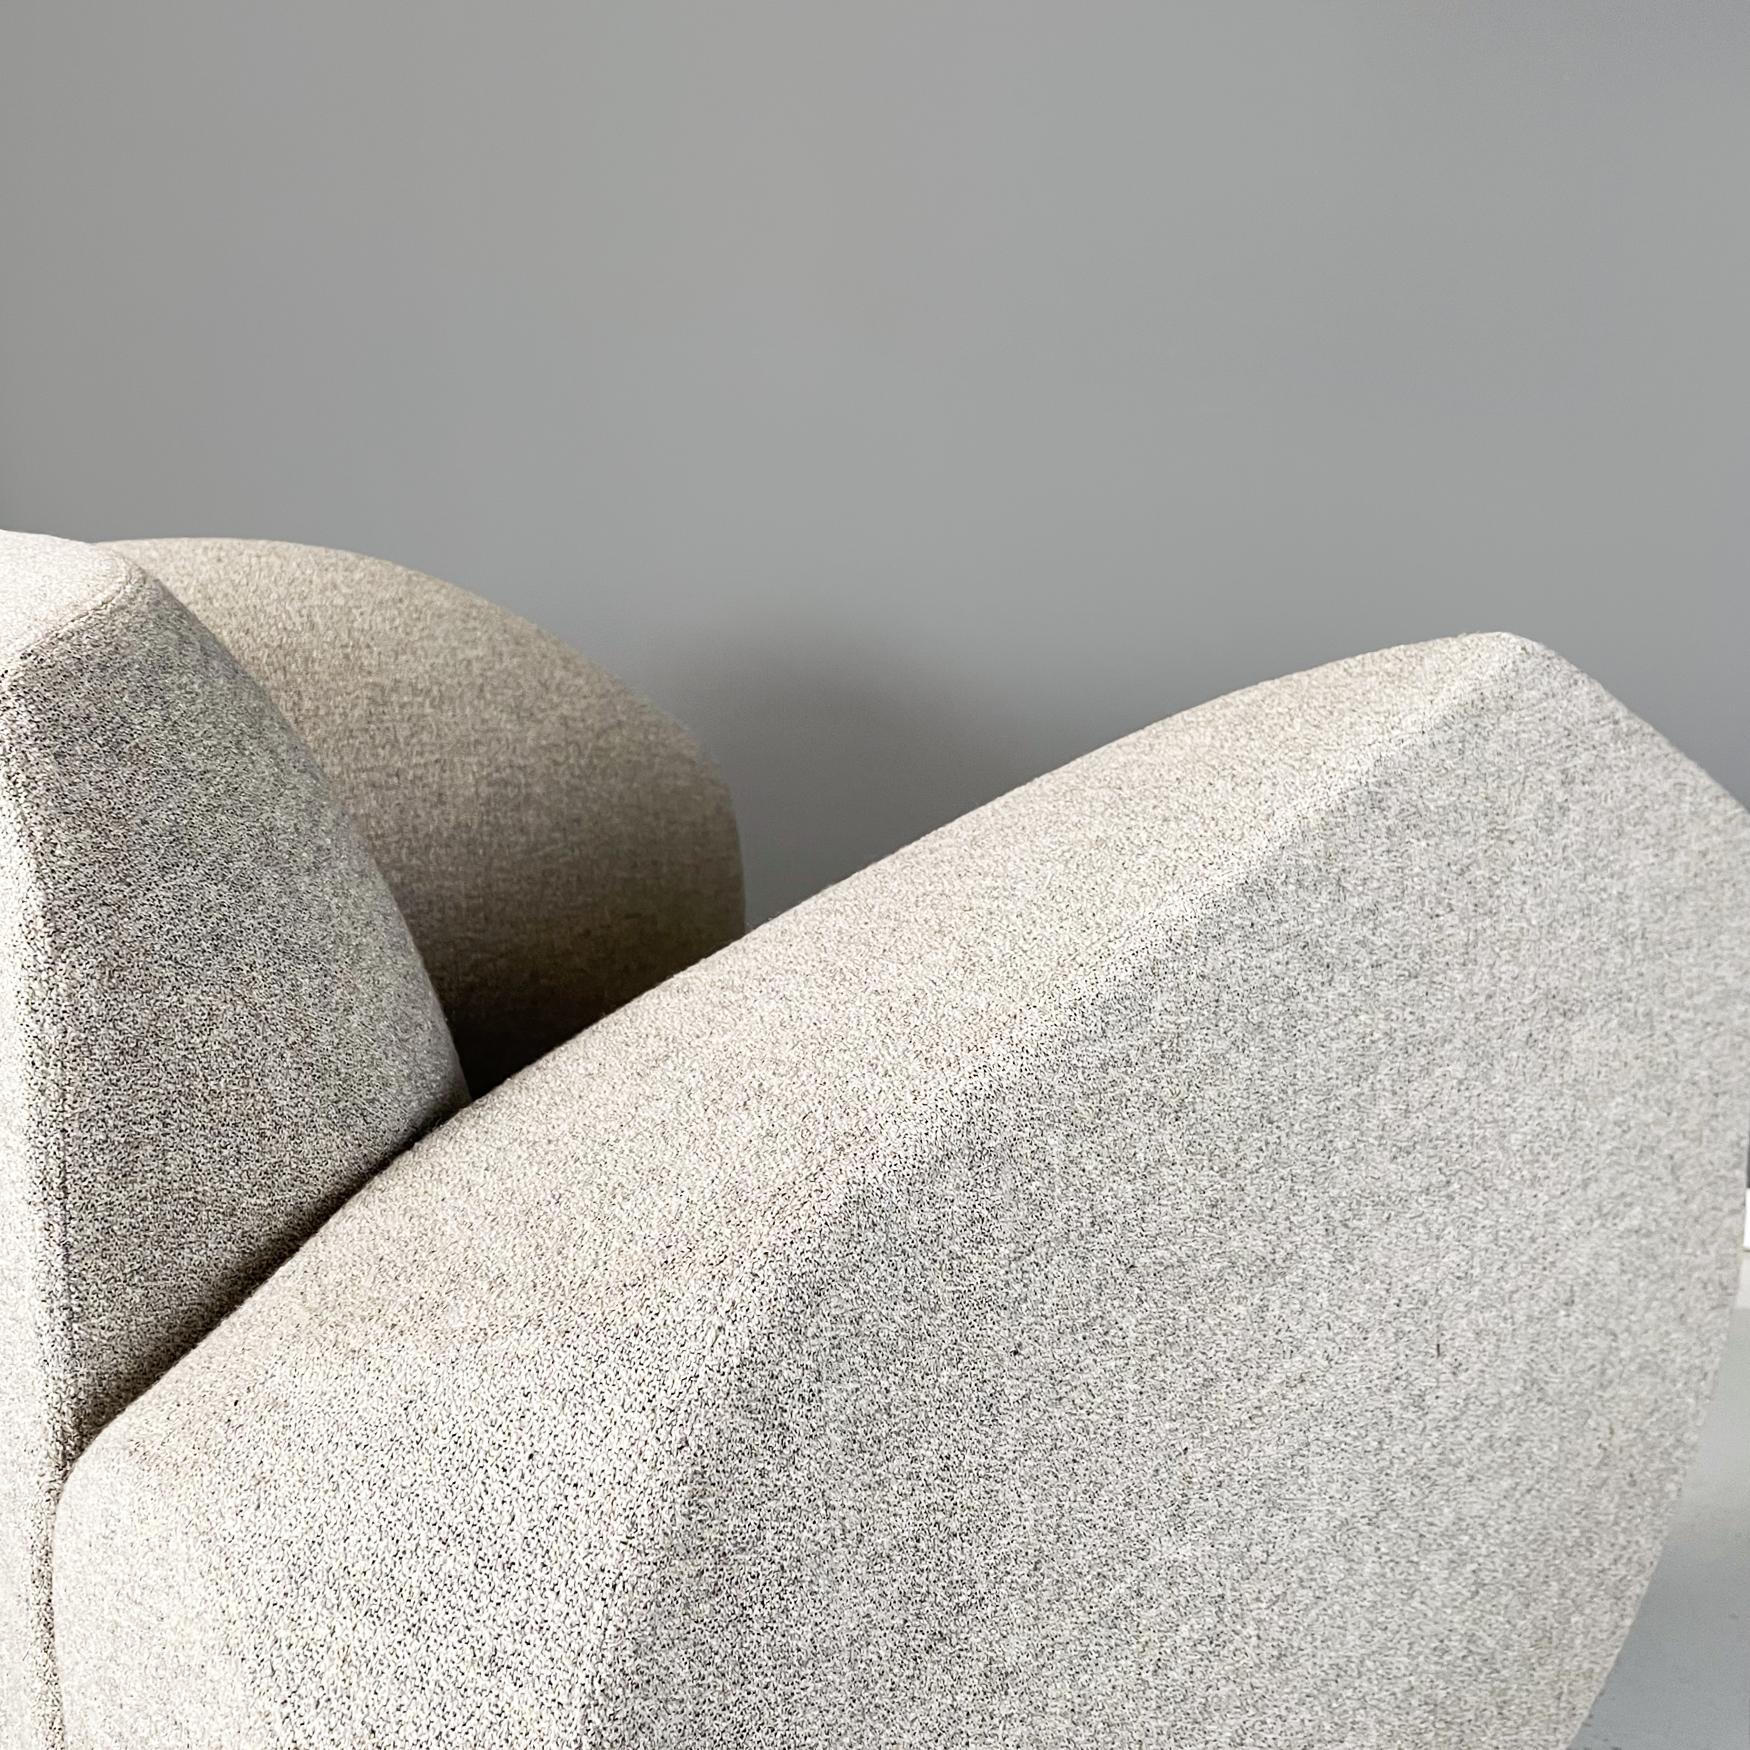 Italian Post-Modern Armchair Hotel 21 Lobby by Mariscal for Moroso, 1990s-2000s For Sale 2